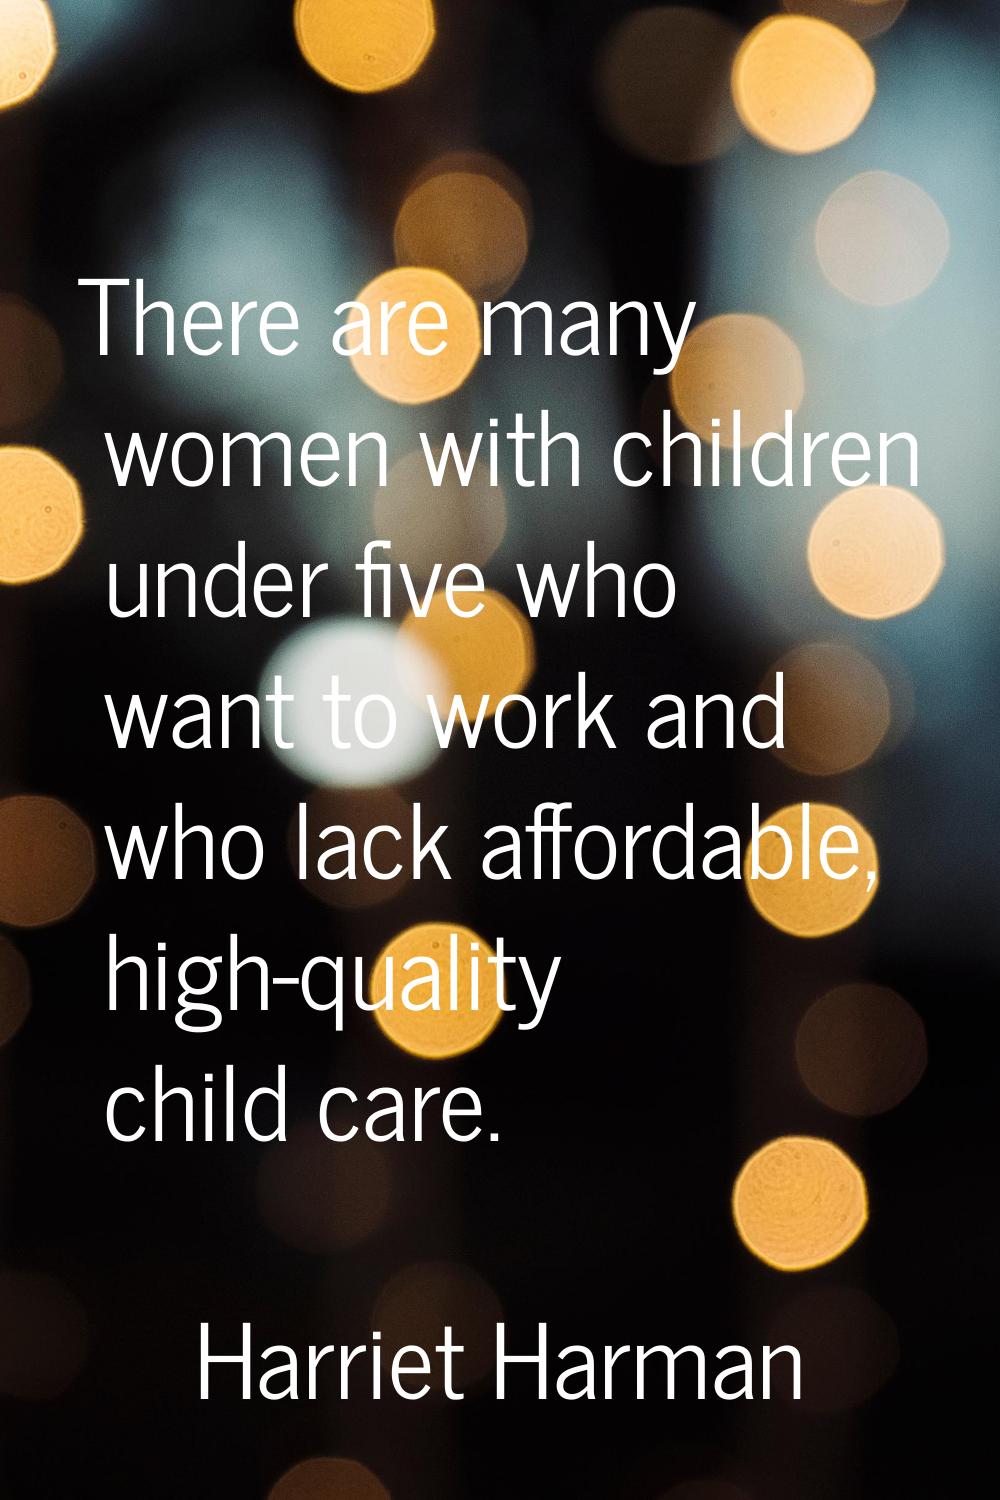 There are many women with children under five who want to work and who lack affordable, high-qualit